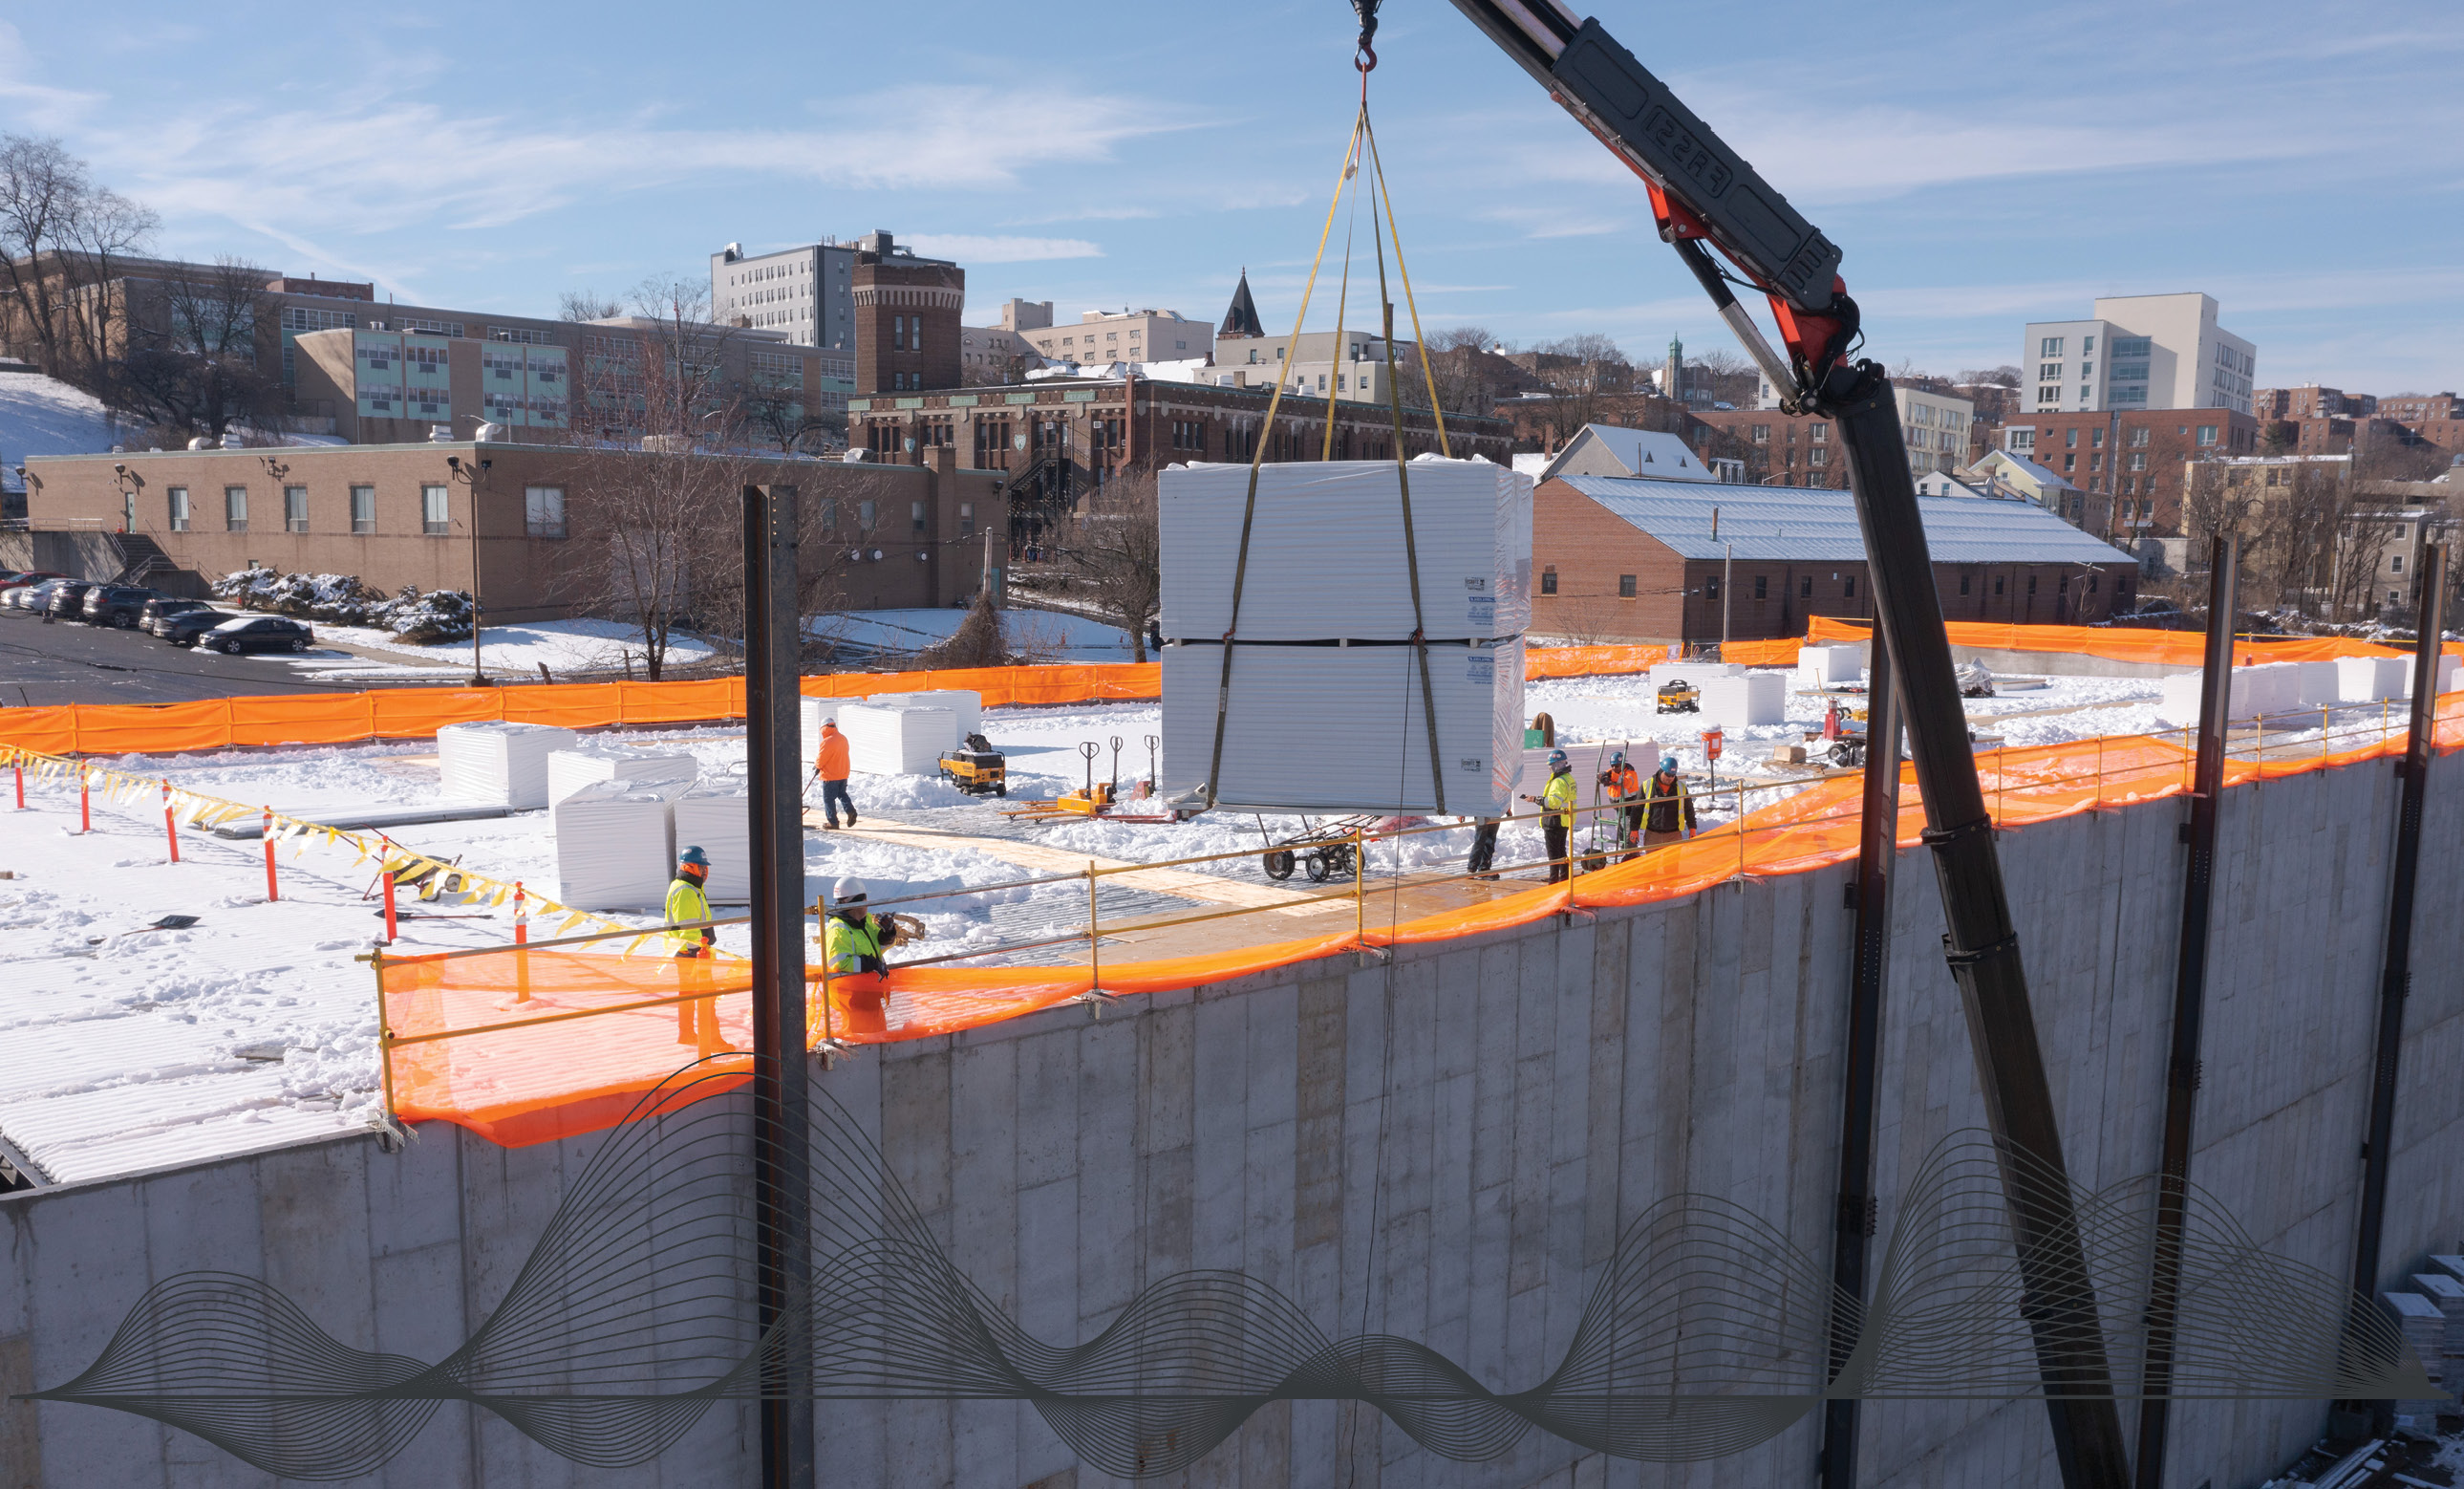 Soundproof roofing - Nations Roof helps solve a noise issue for Lionsgate Studios